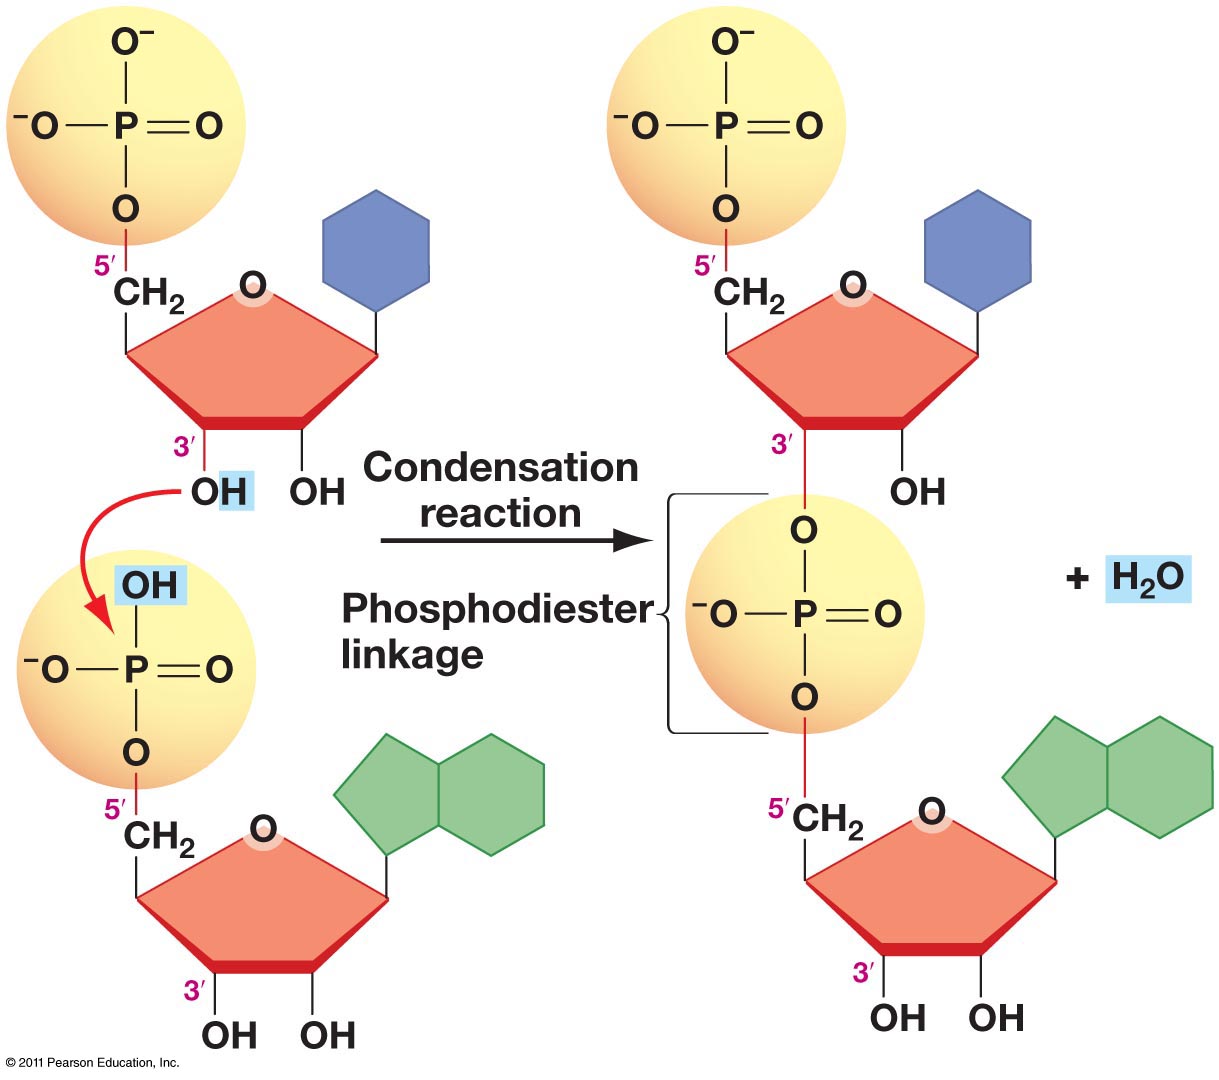 <p>Nucleotides connect by creating covalent bonds between the sugar of one nucleotide  and the phosphate group of another nucleotide in a condensation reaction.</p><p>The 5’ phosphate group on one nucleotide forms a new  covalent bond with the 3&apos; carbon on the pentose of the next nucleotide.   Water is created as a byproduct.</p>